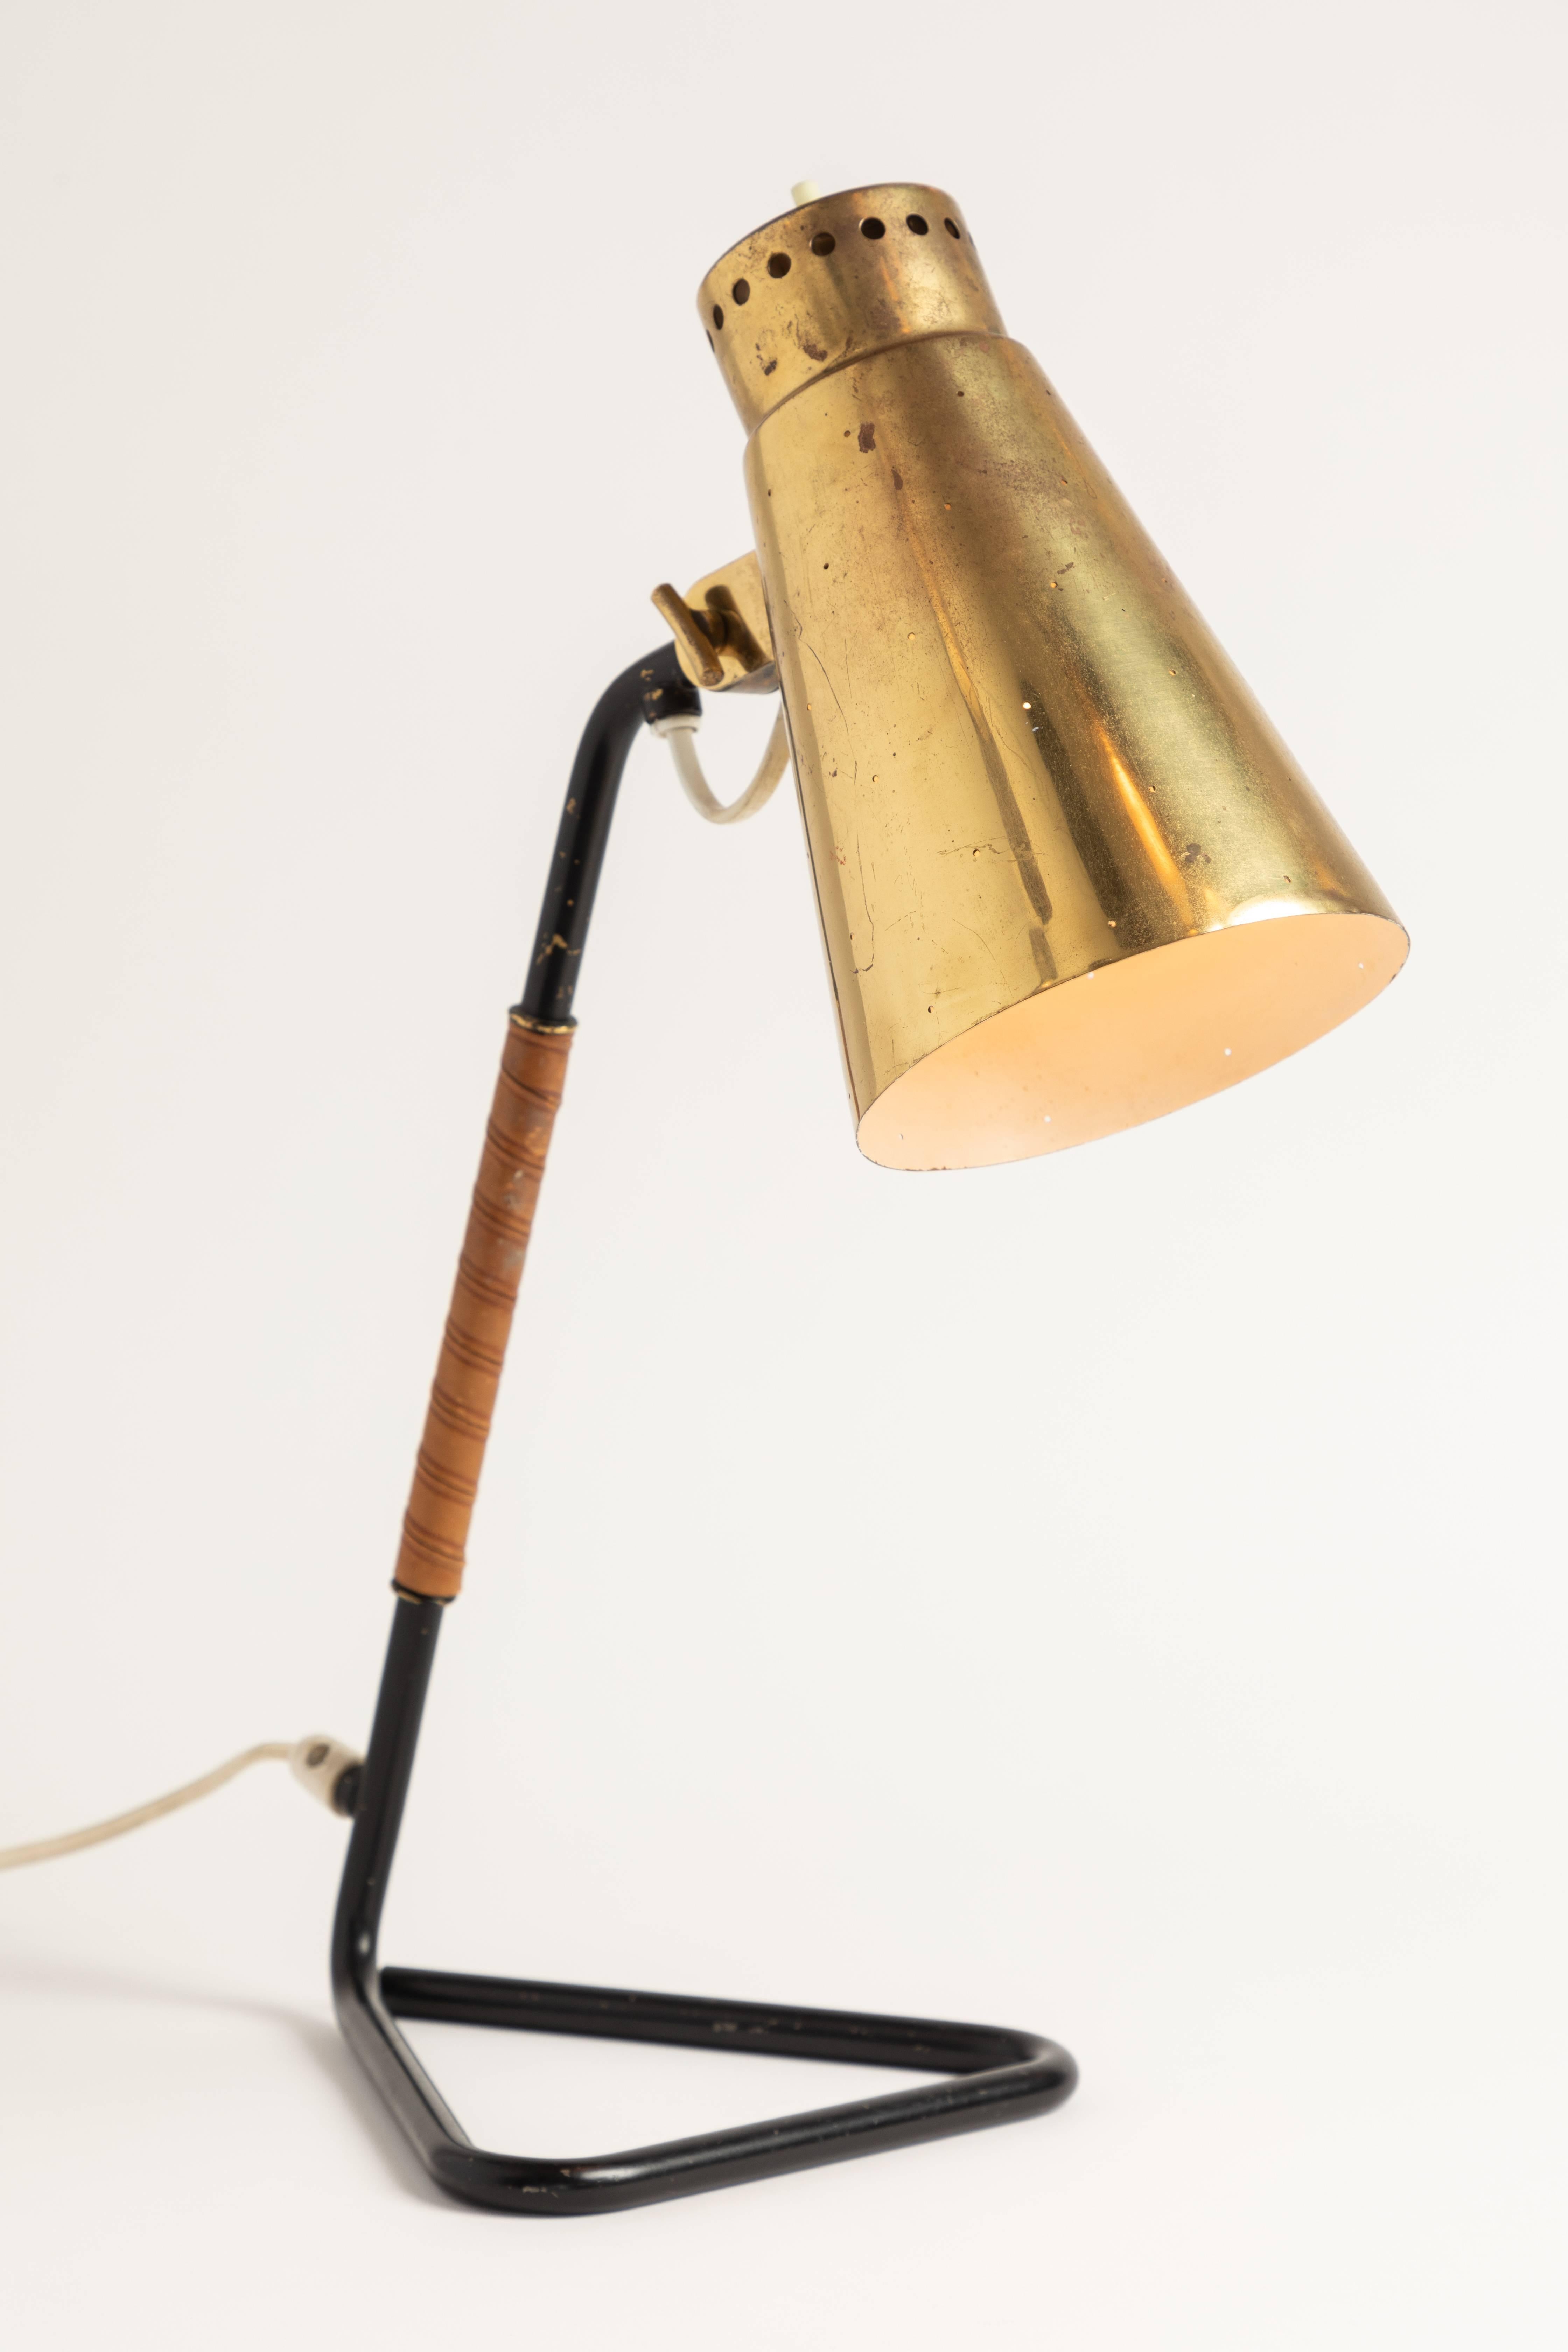 1950s Mauri Almari brass and metal table lamp for Itsu. A rare and elegant table lamp executed in brass, black painted metal and wrapped leather. A contemporary of Paavo Tynell, the refined work of Mauri Almari has made him an increasingly valued